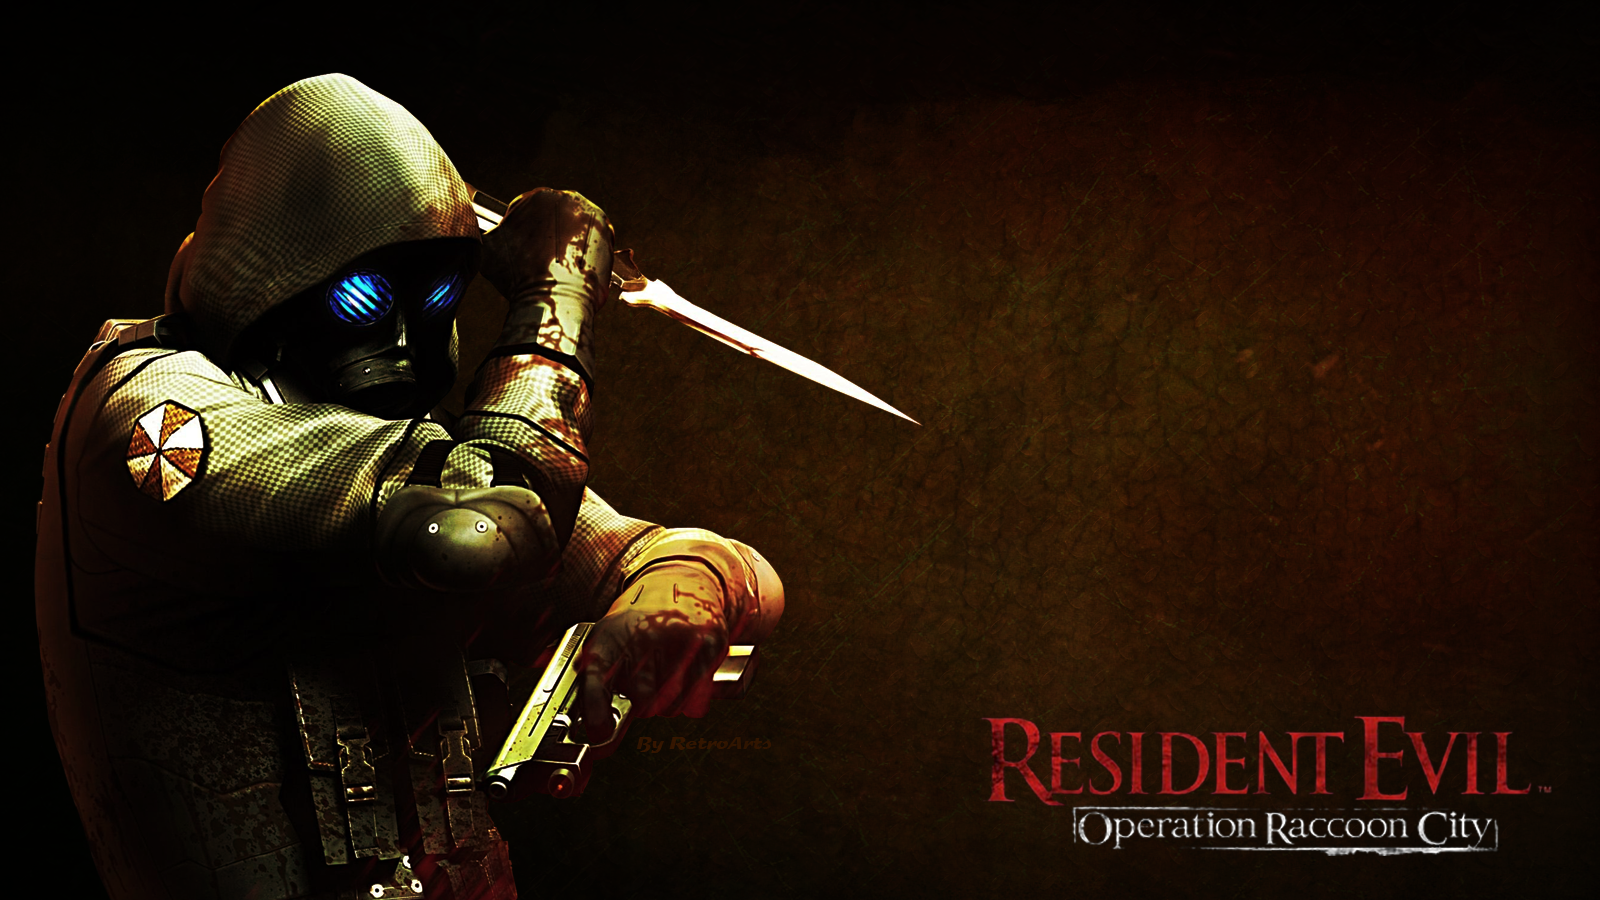 21 resident evil operation raccoon city hd wallpapers background.